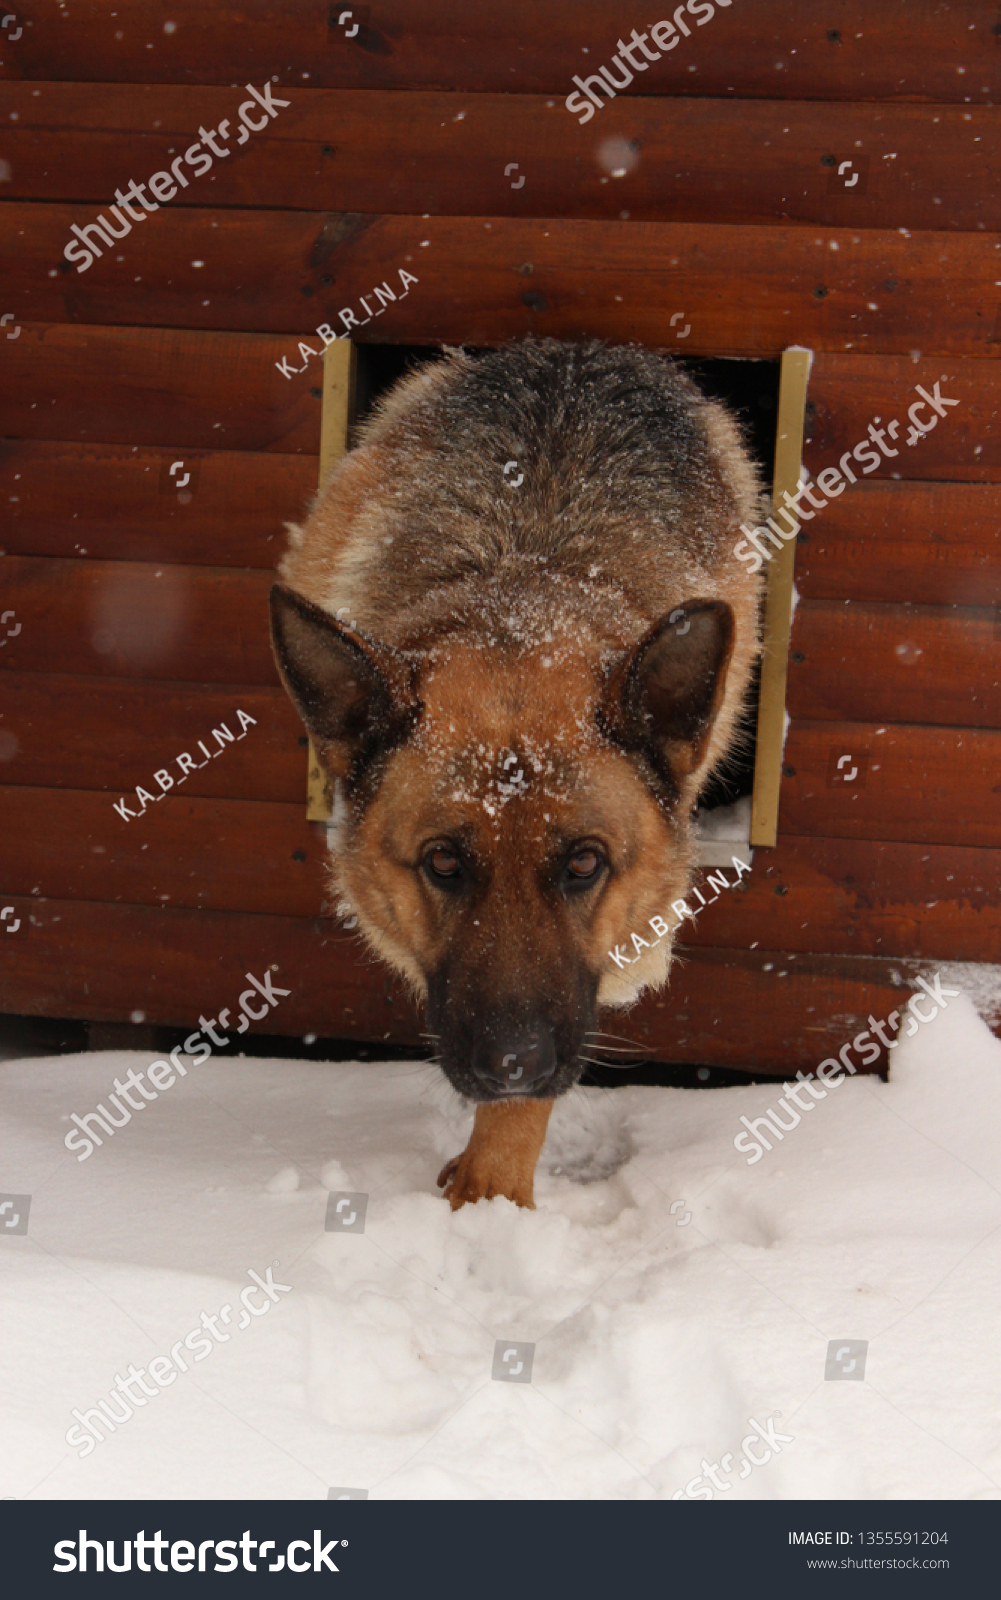 Extremely confident the dog imagines a model that goes courageously on a podium in extreme conditions #1355591204